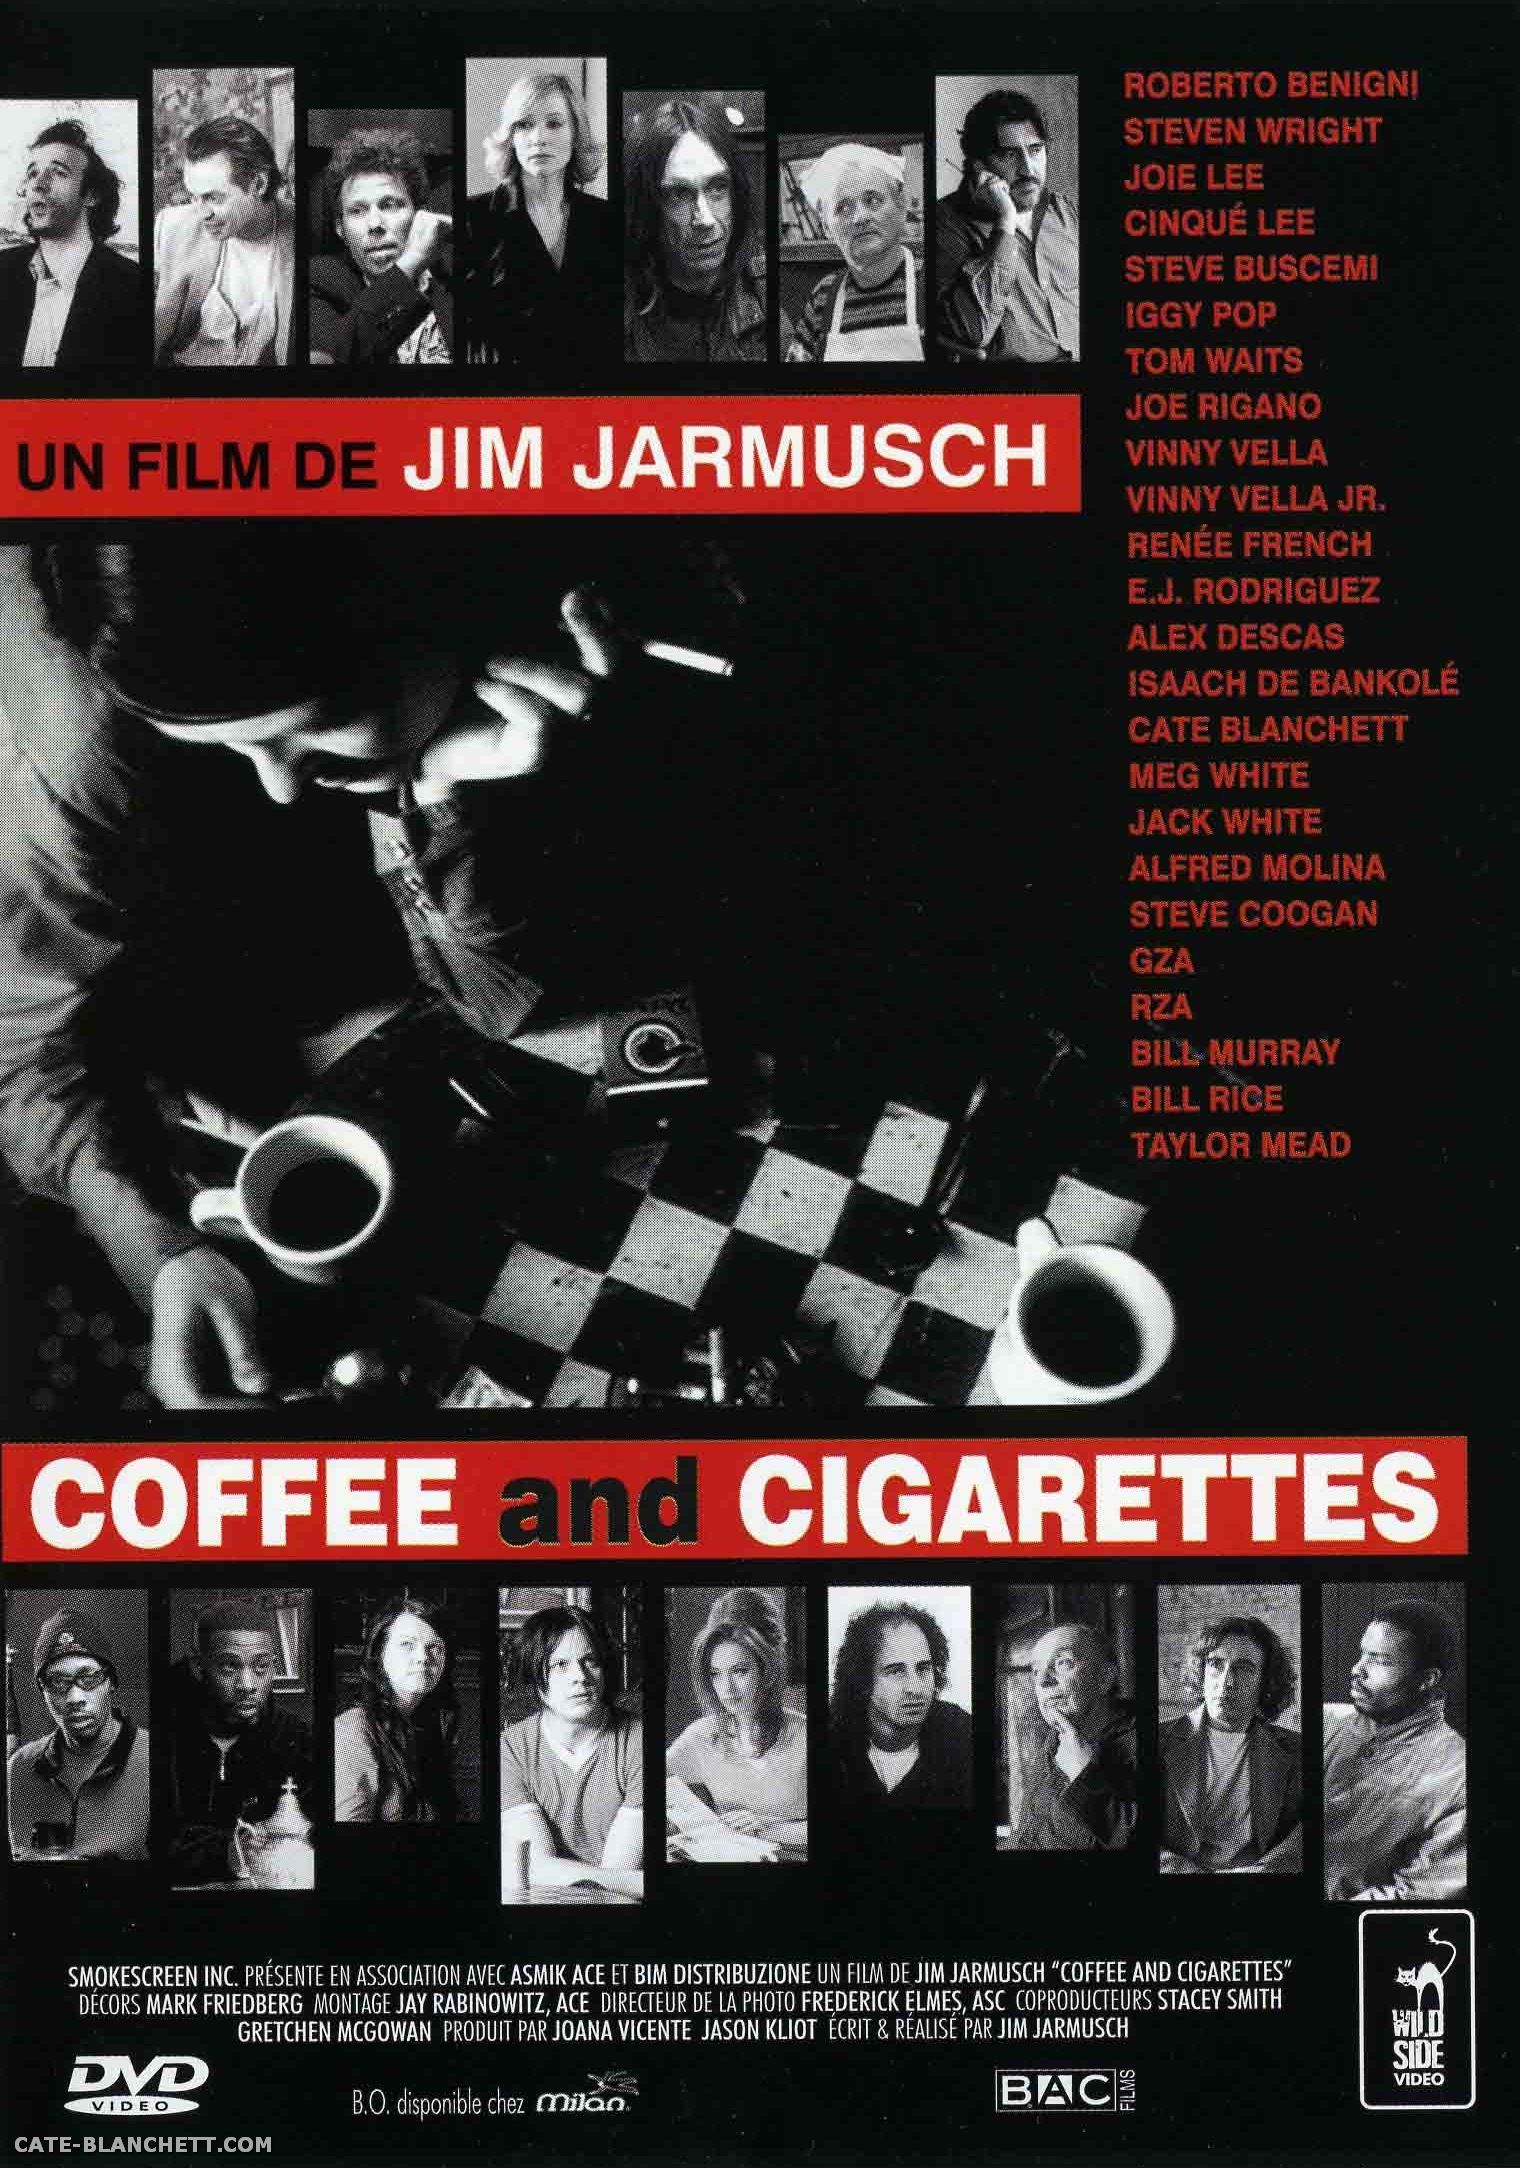 CoffeeandCigarettes-Posters_010.jpg